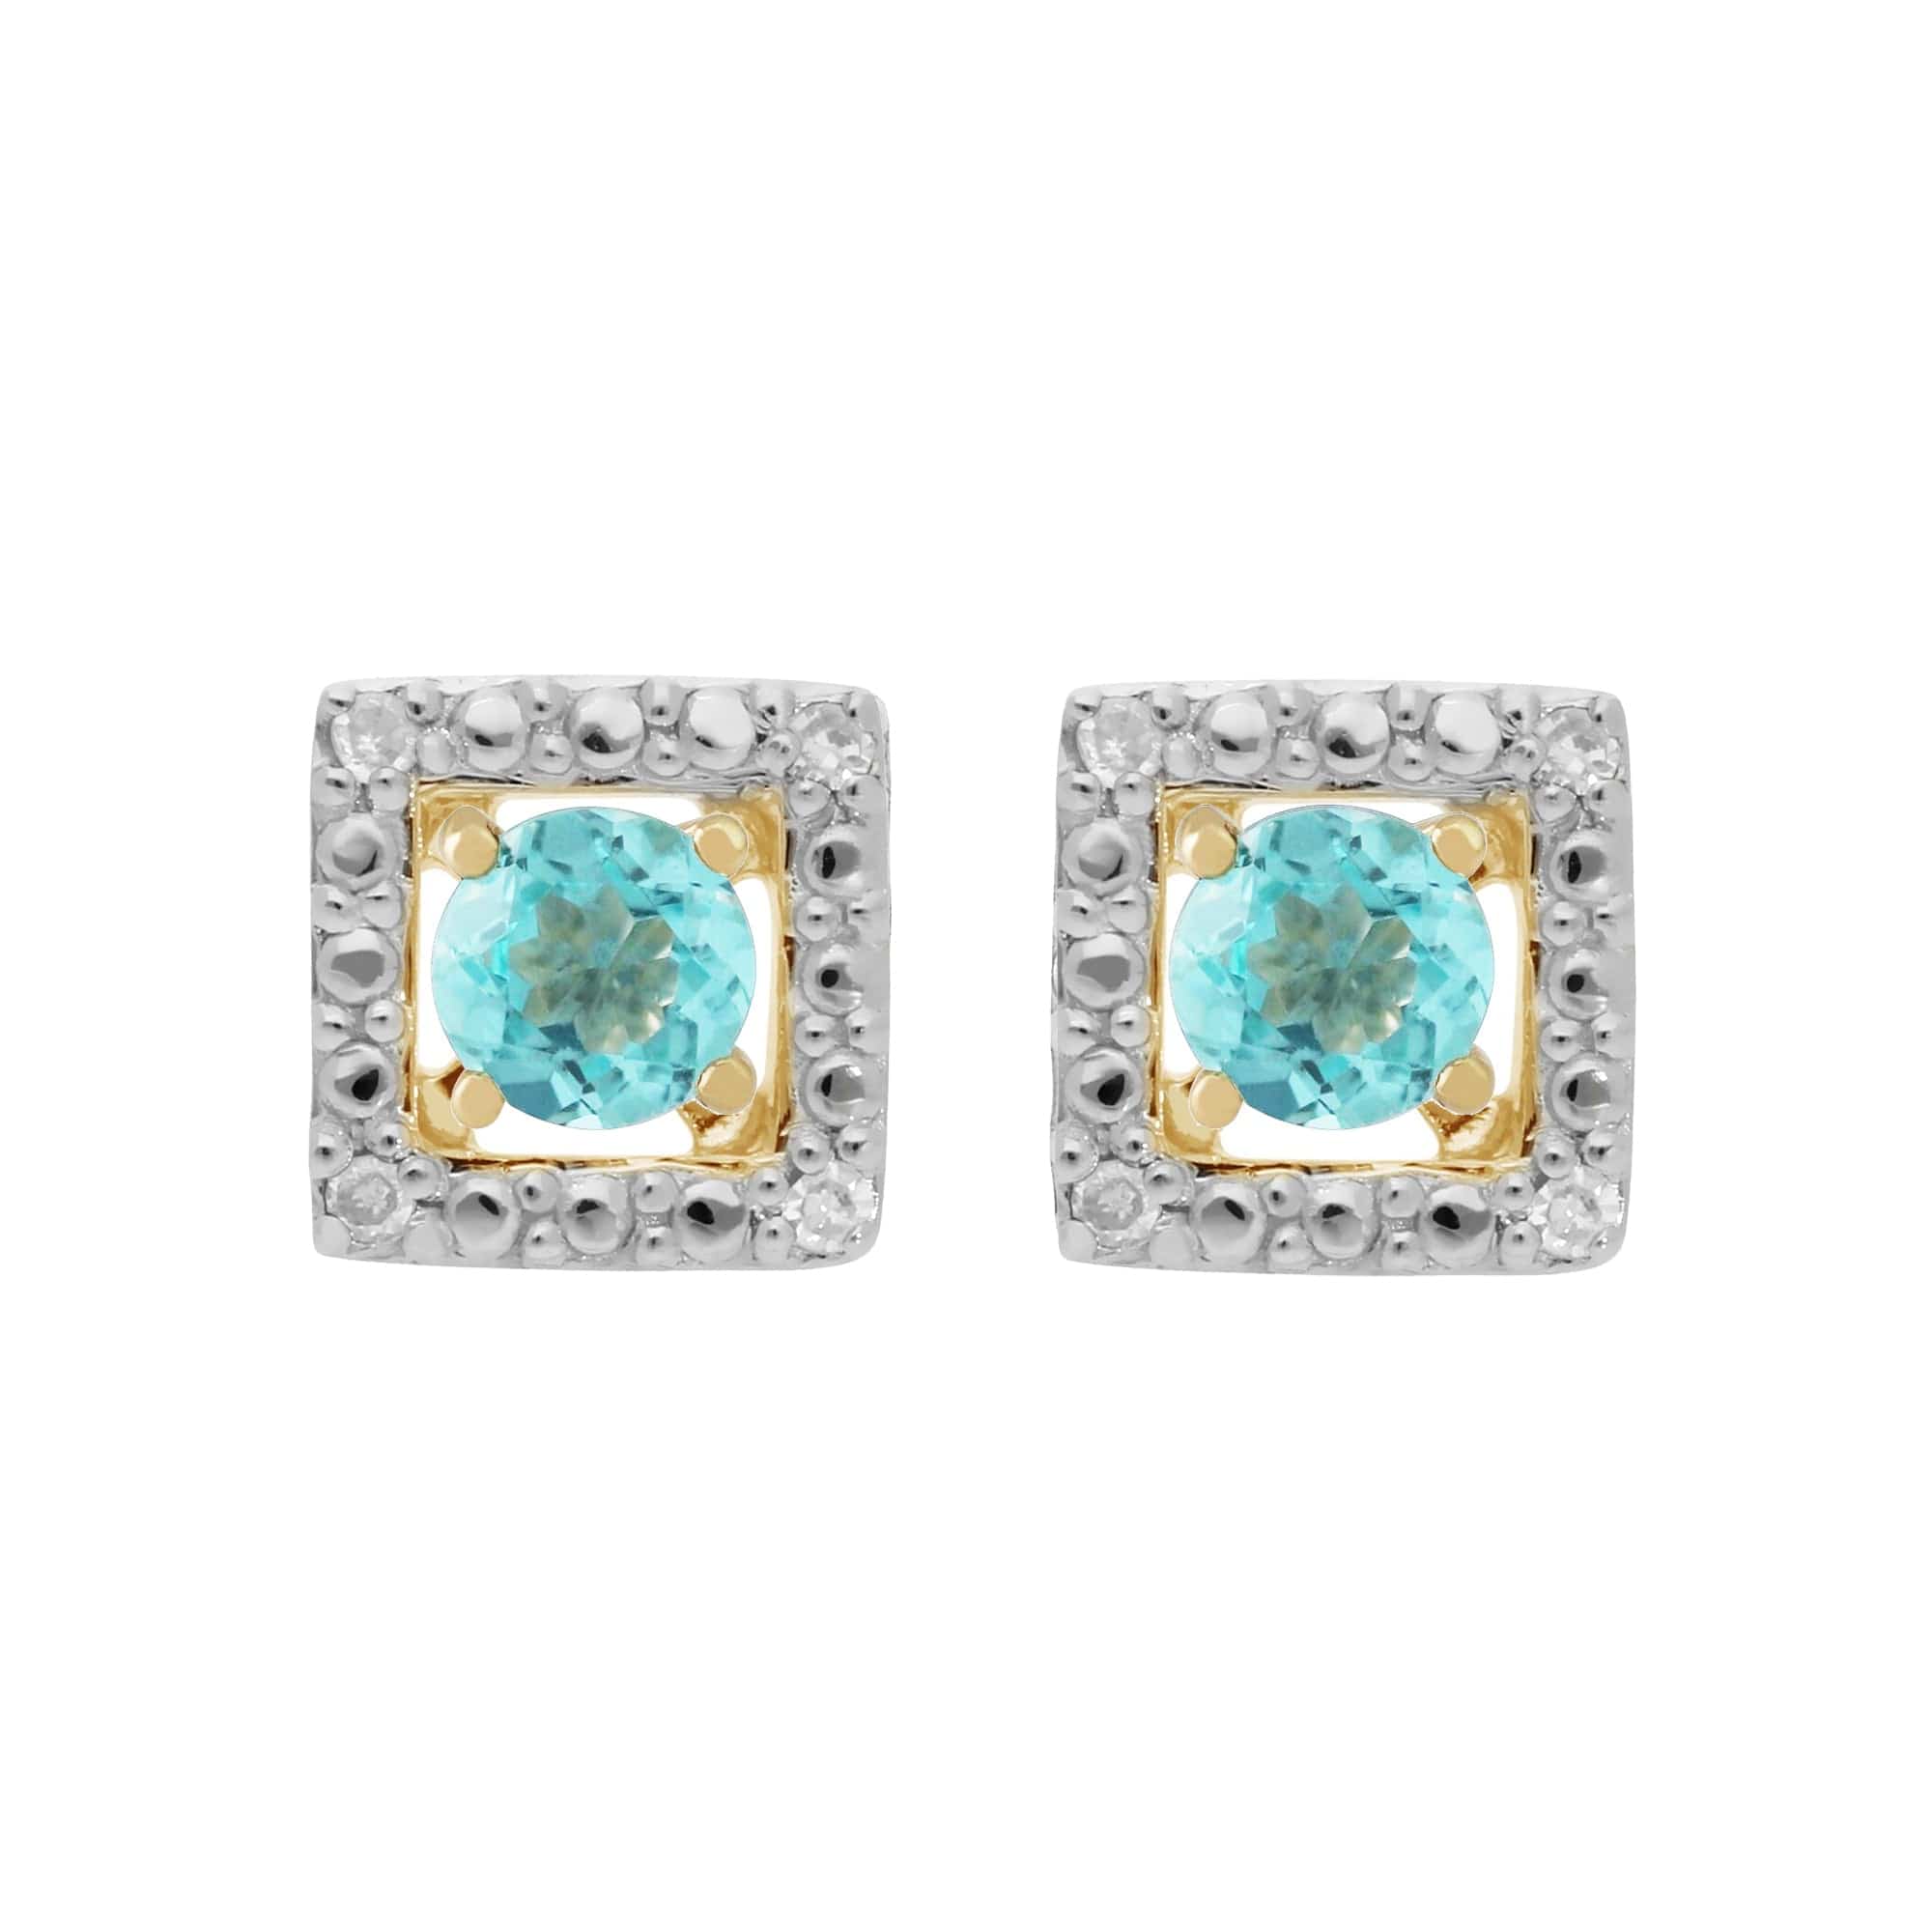 183E0083439-191E0379019 Classic Round Apatite Stud Earrings with Detachable Diamond Square Earrings Jacket Set in 9ct Yellow Gold 1